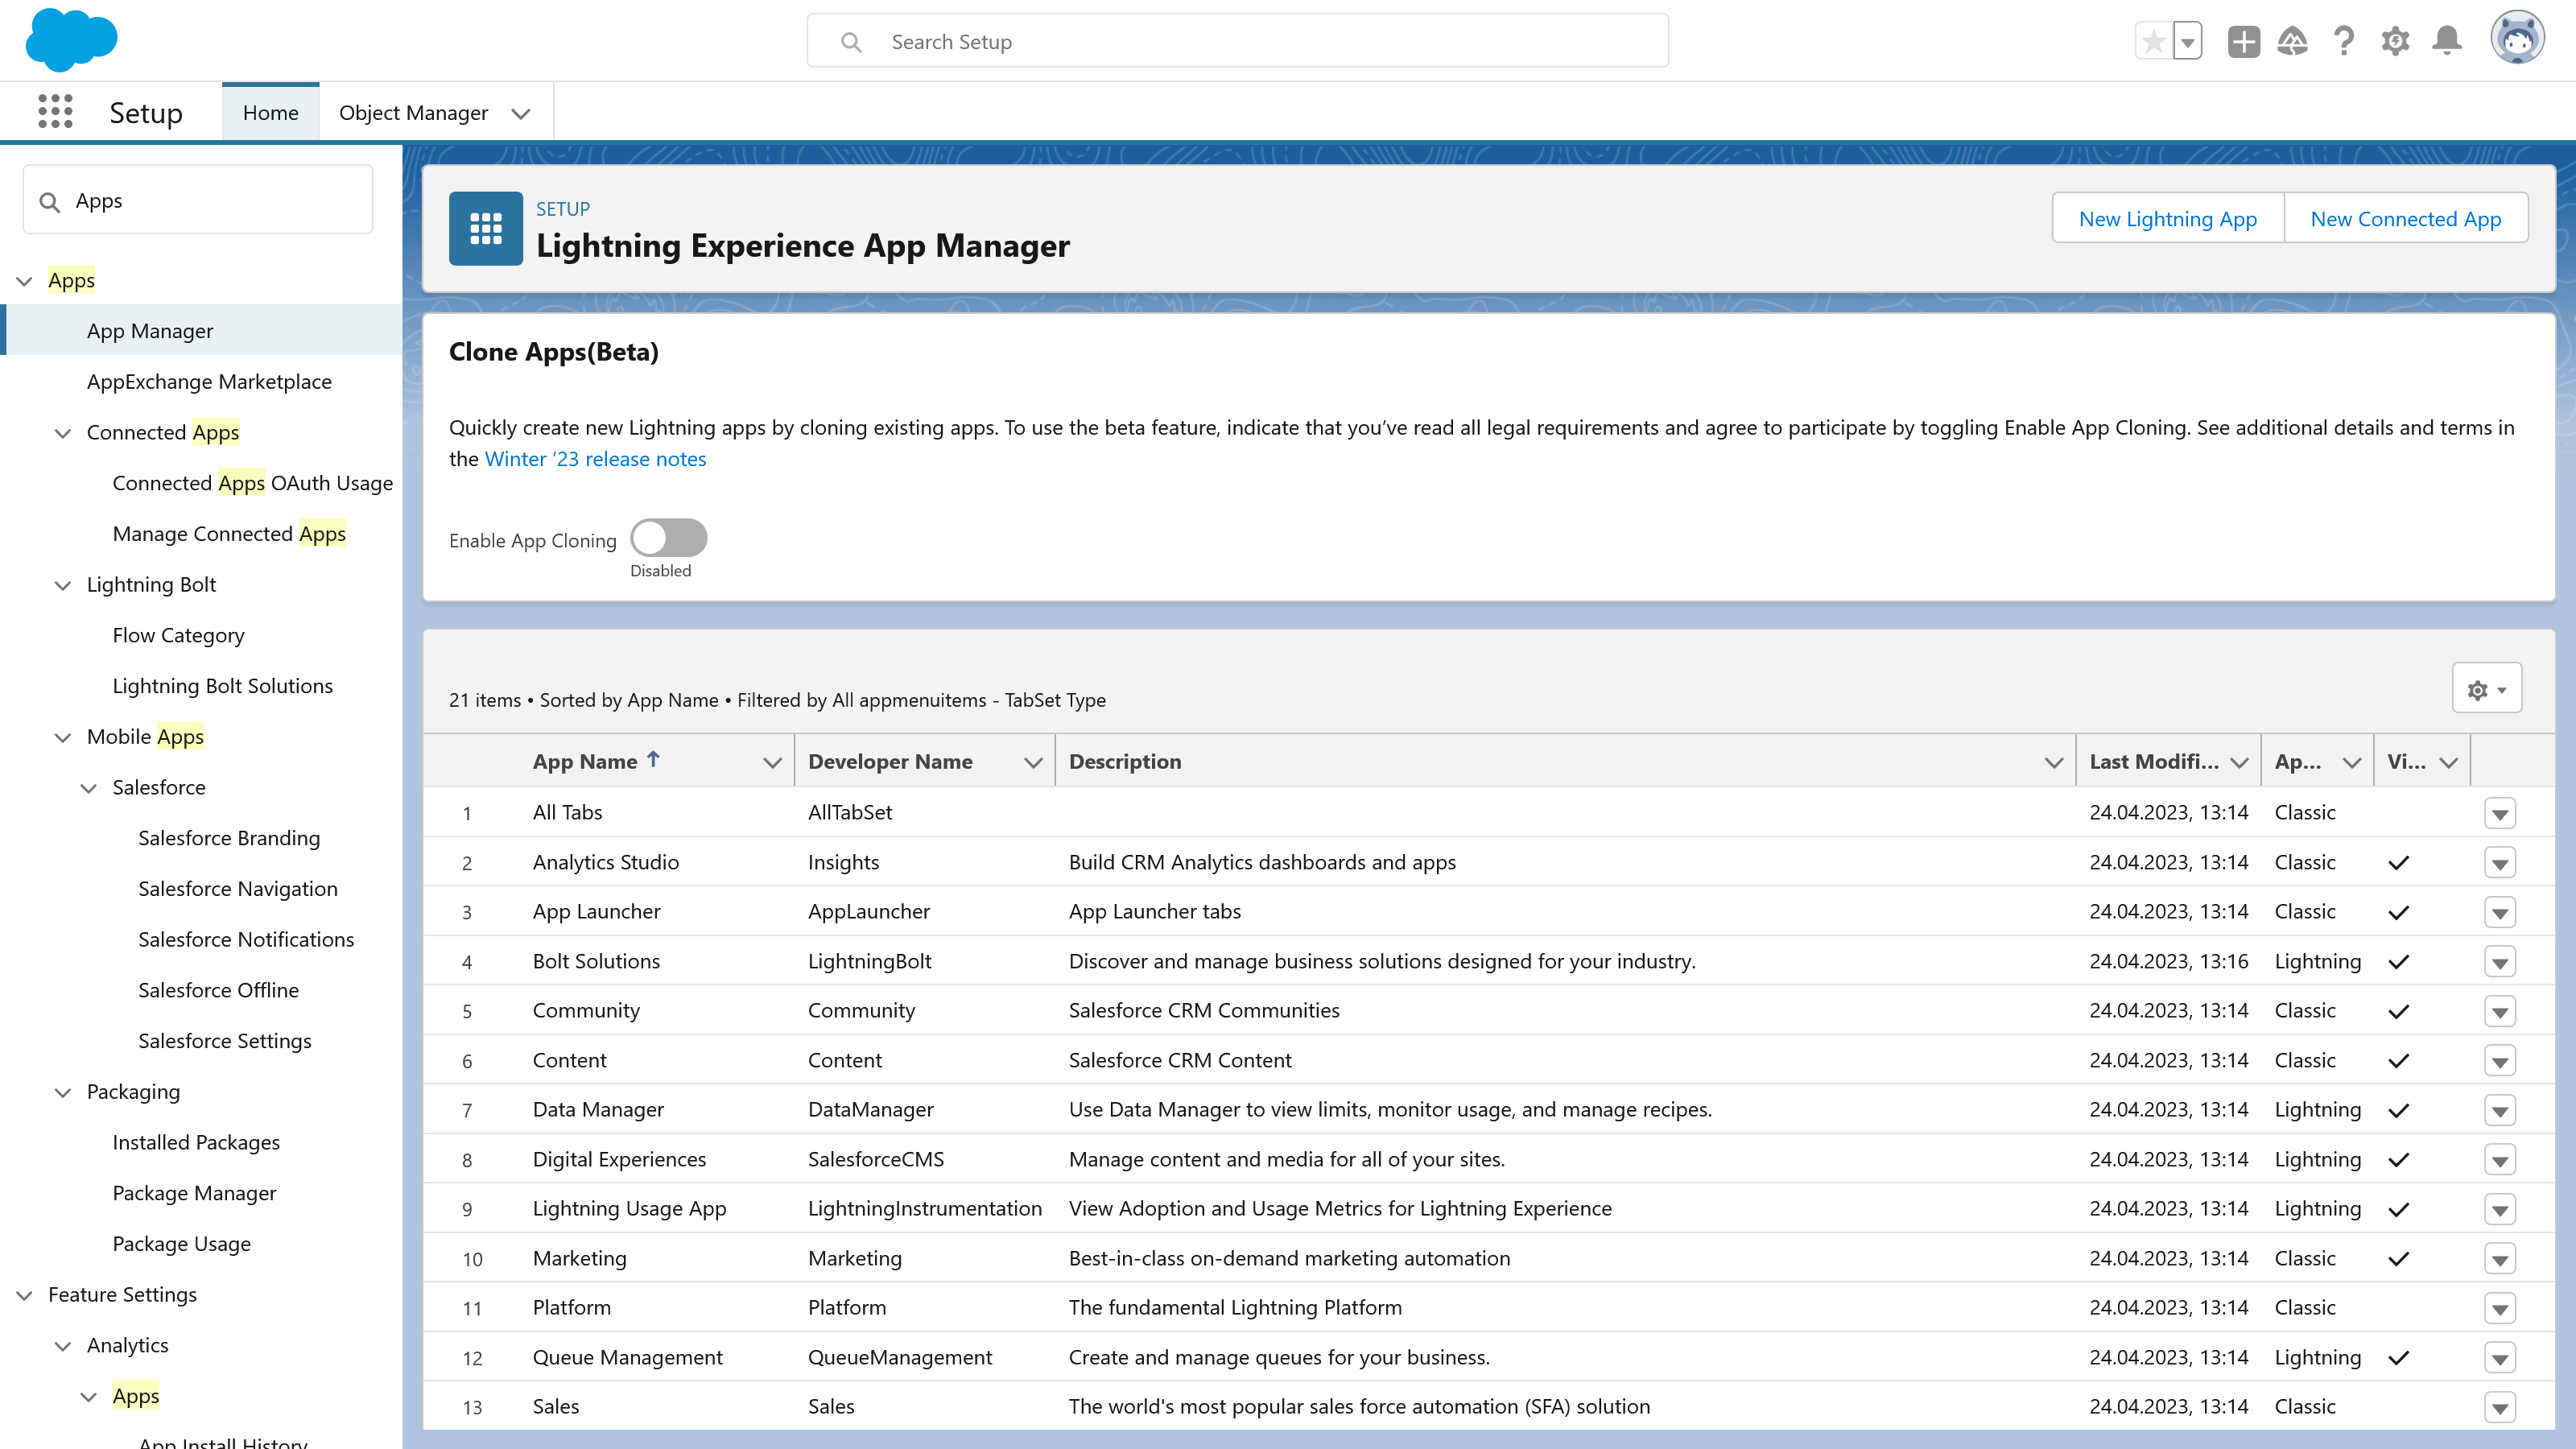 img/salesforce/oauth-07-app-manager.png